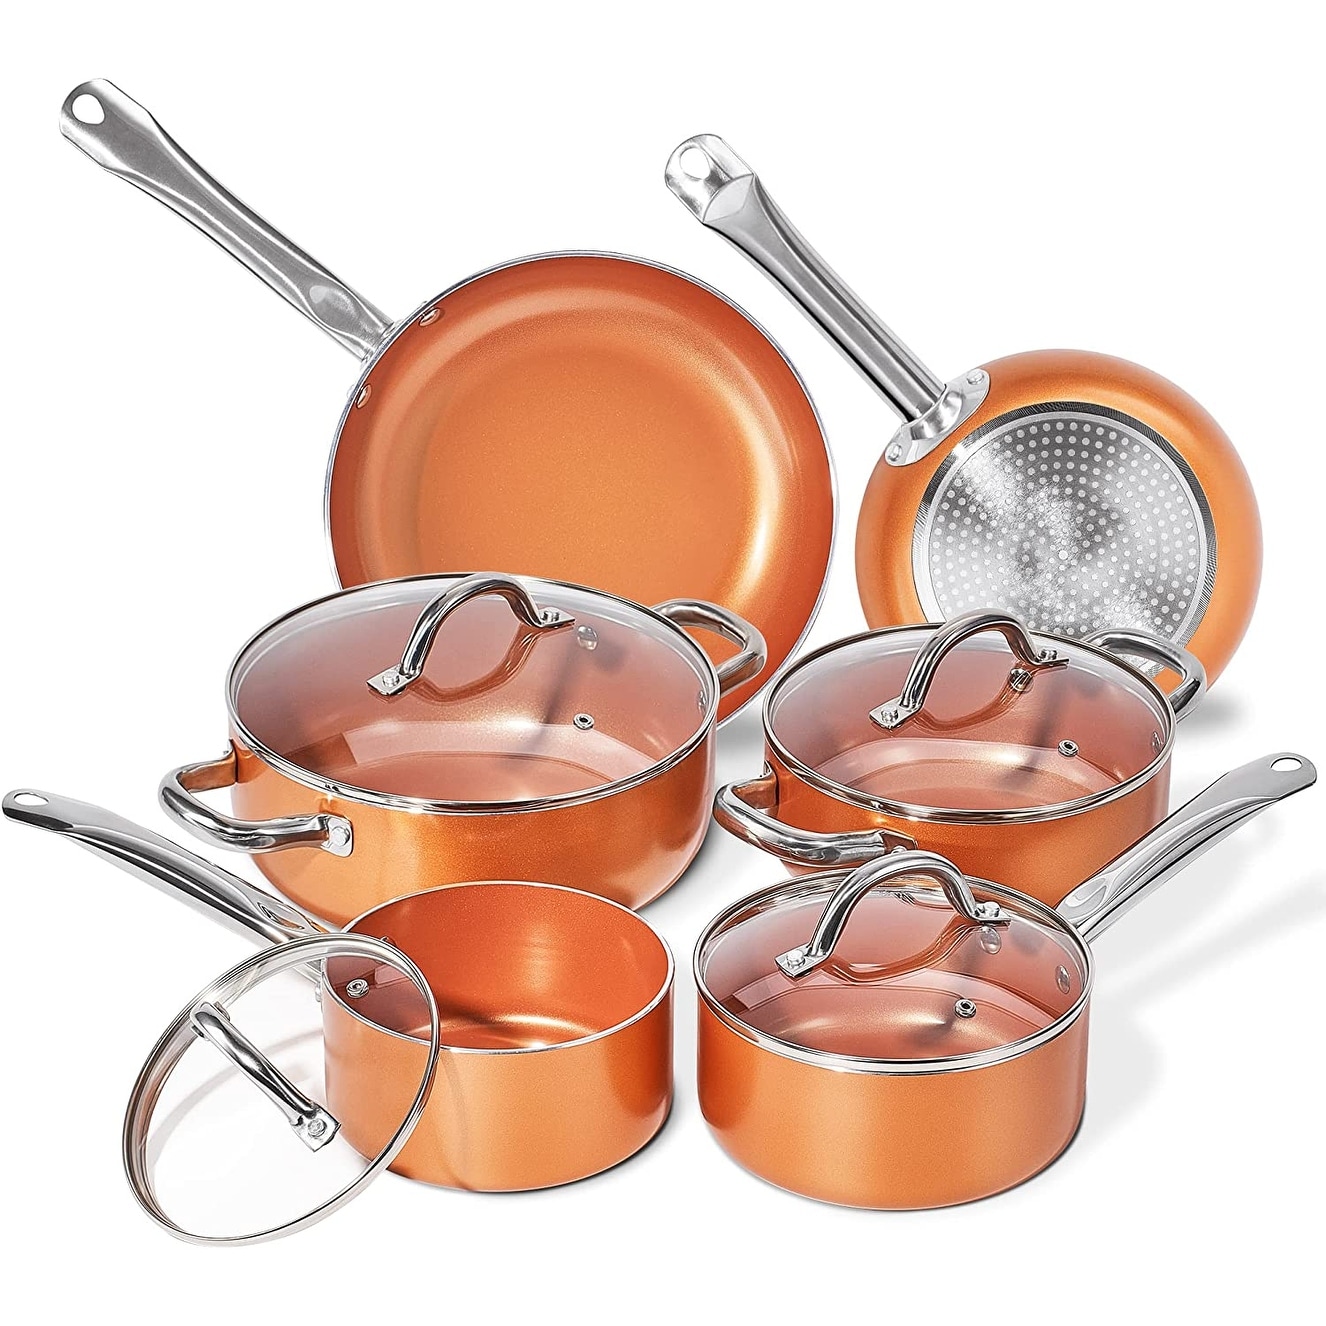 https://ak1.ostkcdn.com/images/products/is/images/direct/cfe36d606943c6fb9765804f2bae99f380aed503/Copper-Pots-and-Pans-Set%2C-10-Piece-Nonstick-Chef-Cookware-Set-with-Ceramic-Coating%2C-No-Assembly-Required-Stainless-Steel-Handles.jpg